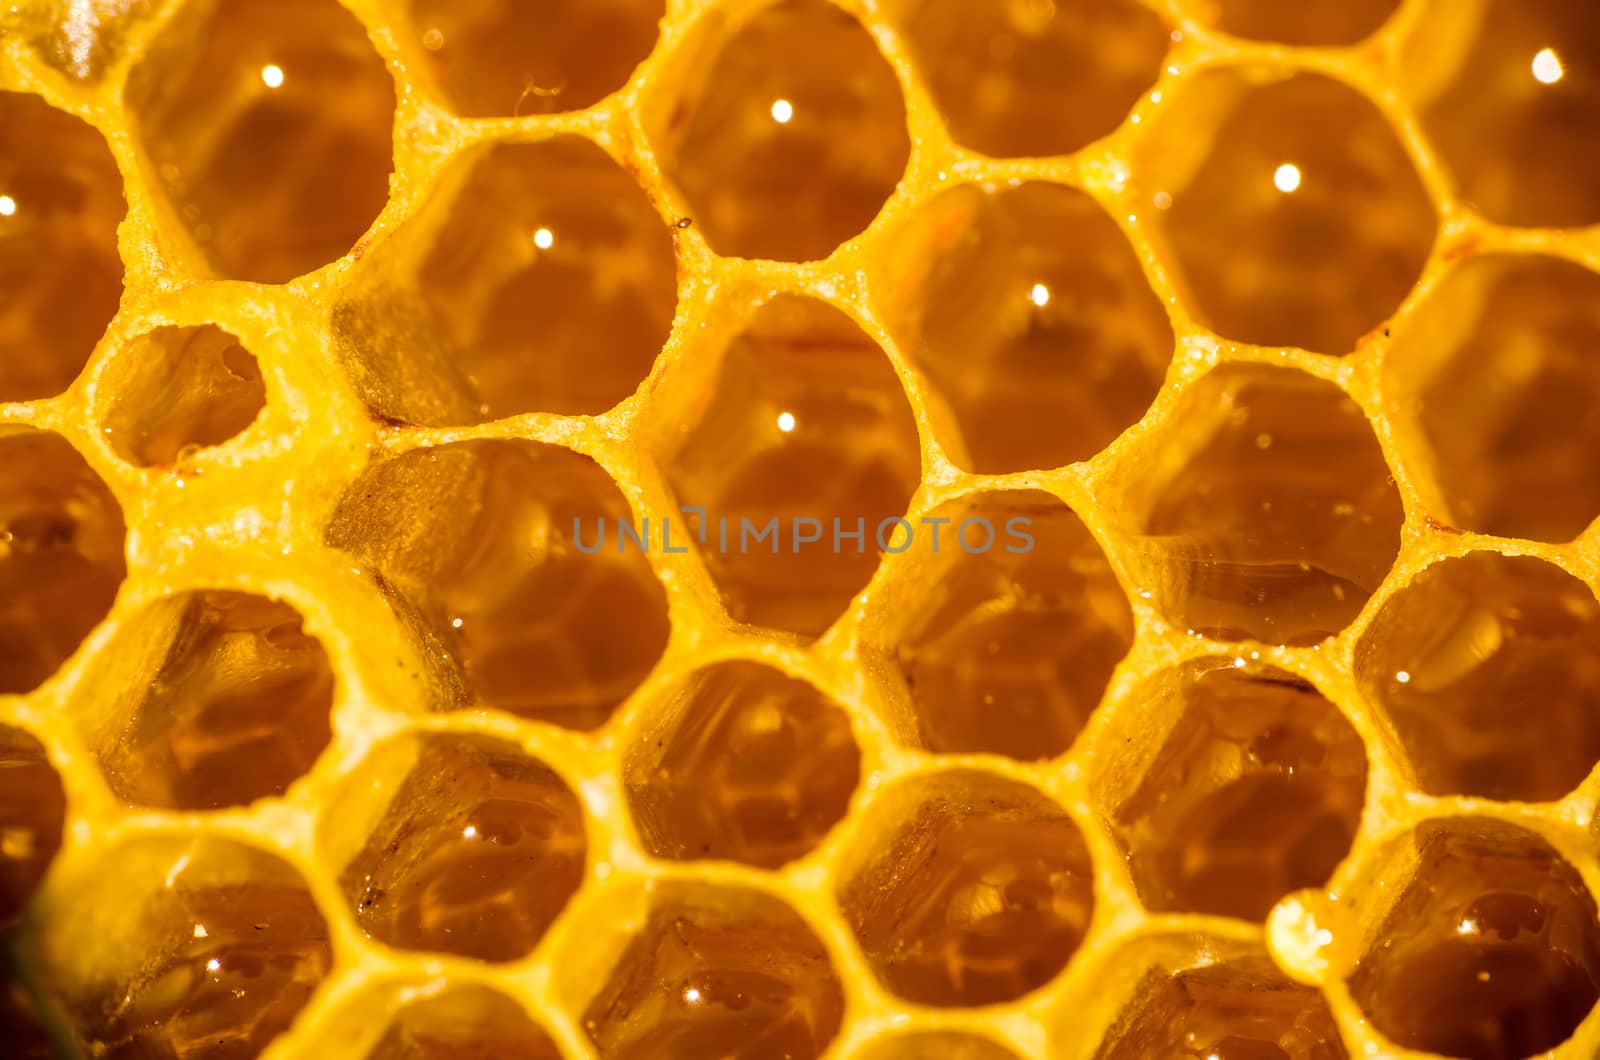 Honeycomb filled with honey by Attila